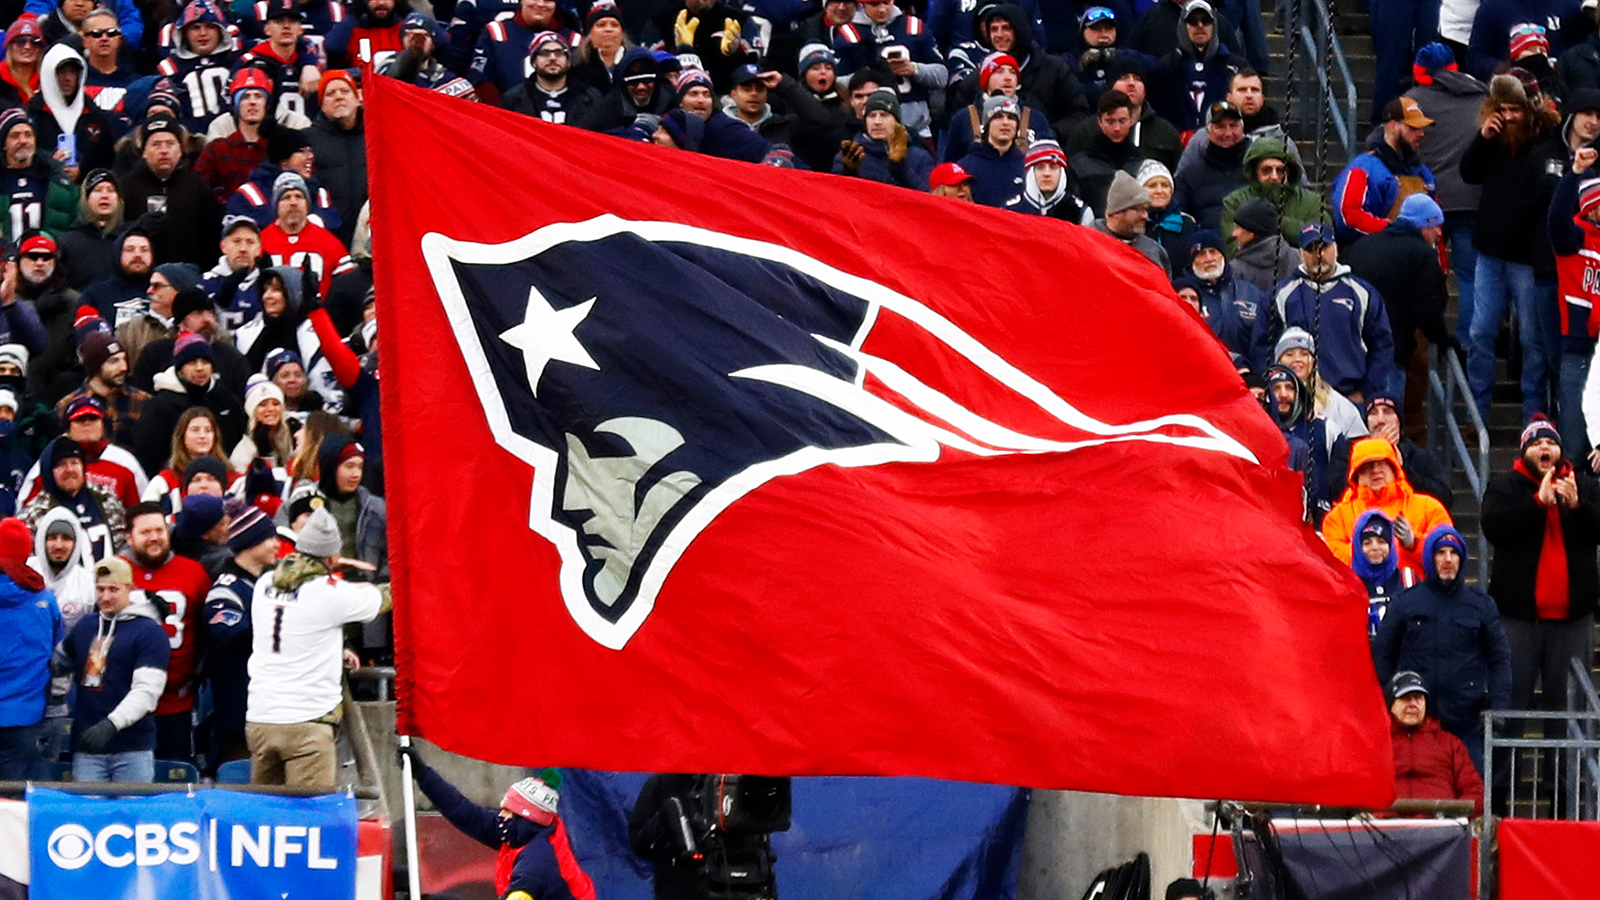 Firefighters Save Fan Who Had Heart Attack At Patriots Game